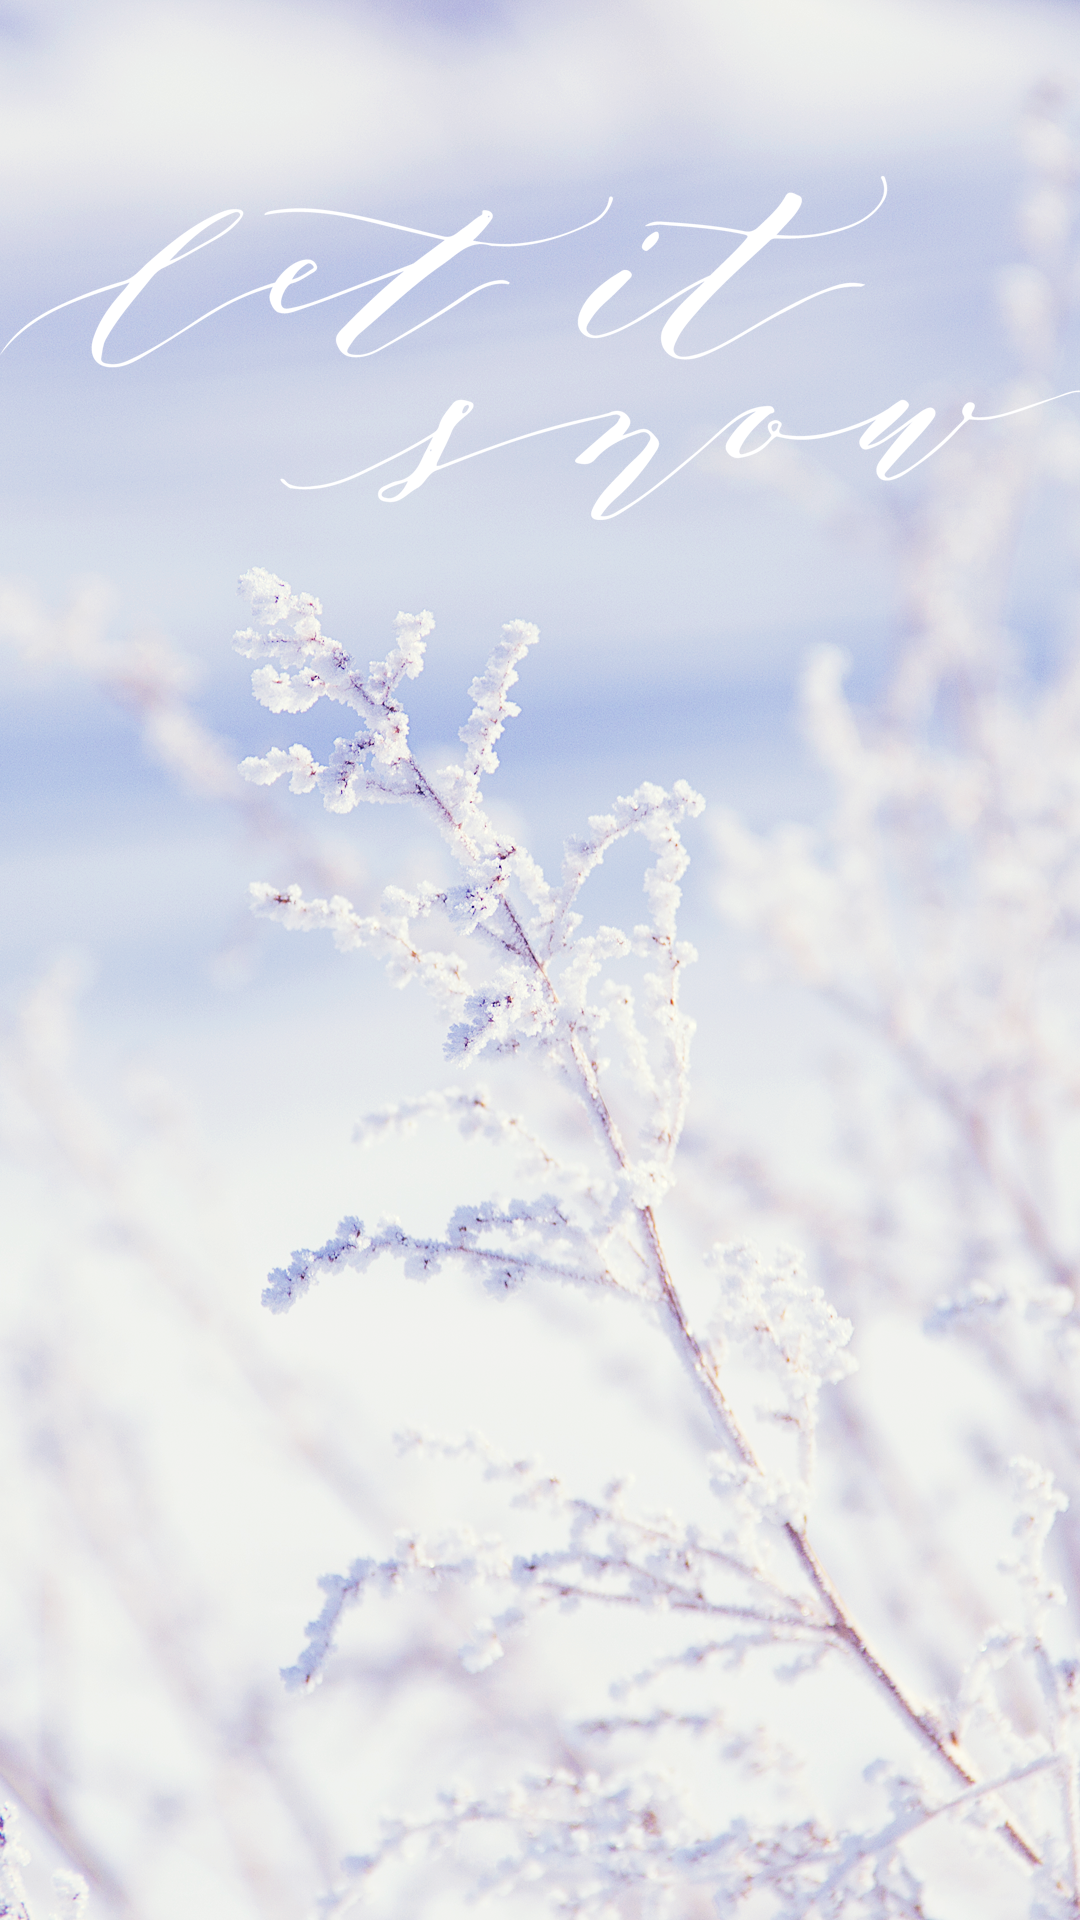 Wallpaper Let It Snow Iphone 6 Pop Goes The Reader